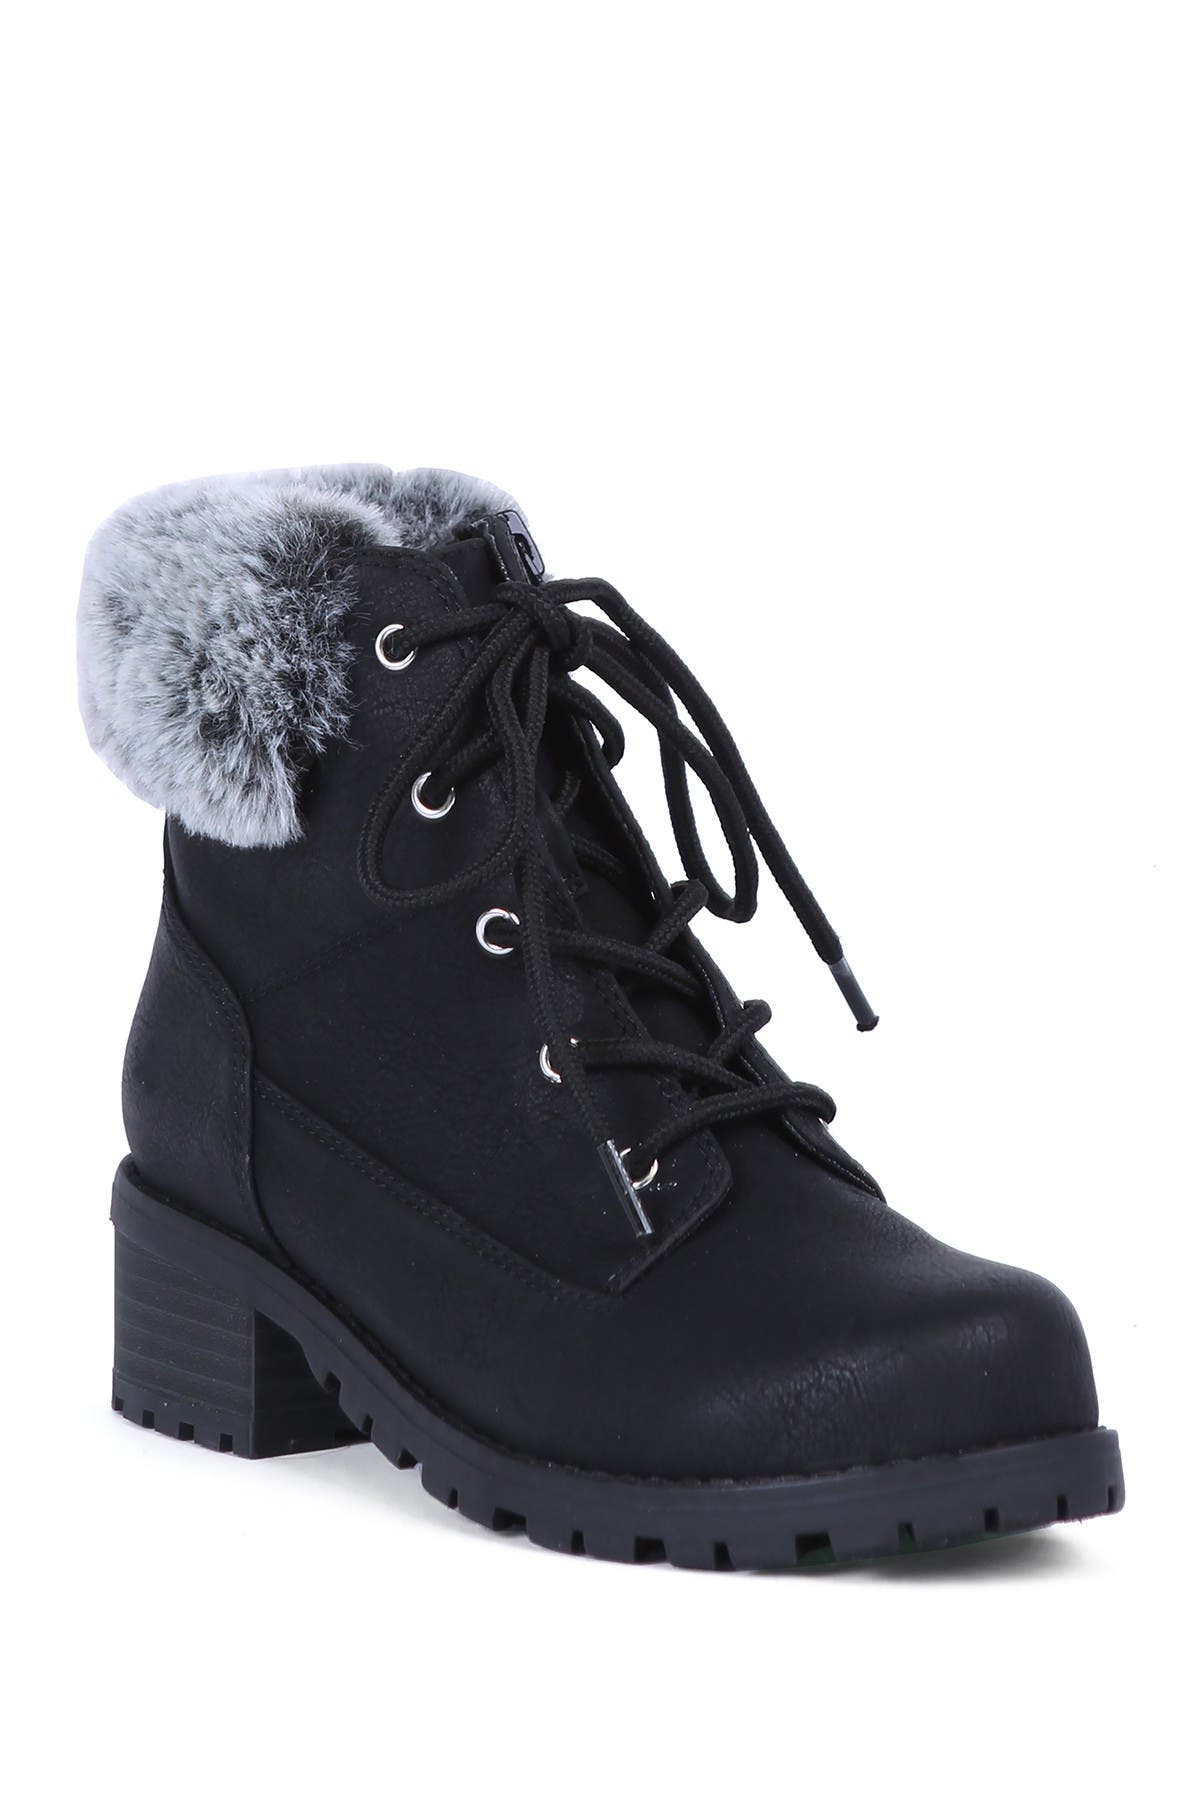 combat boots with fur inside